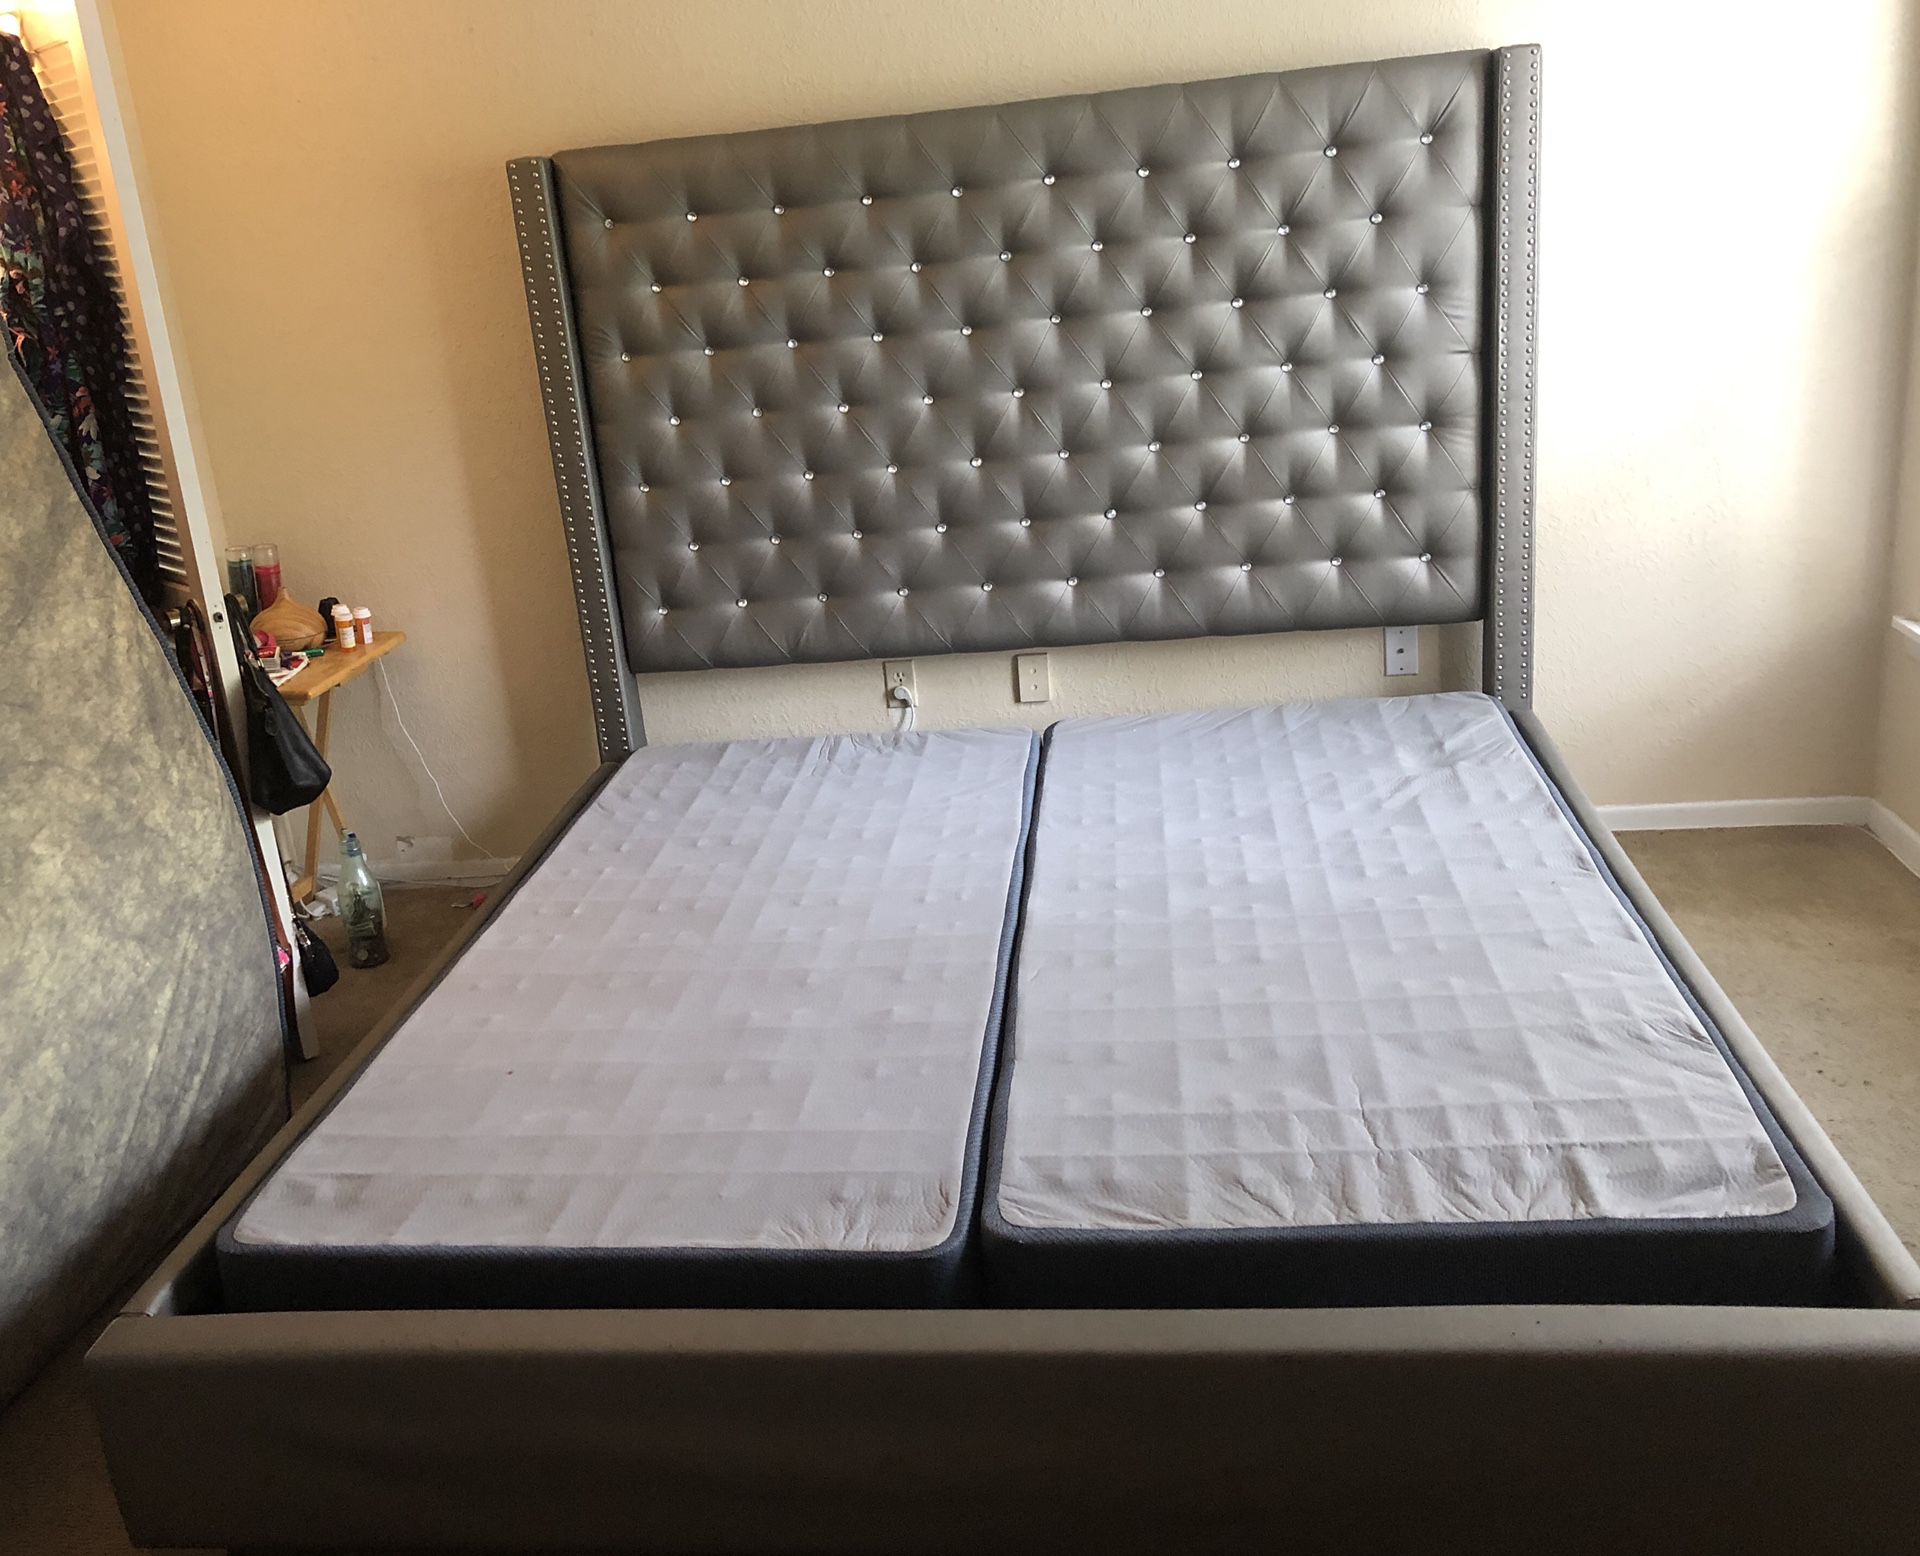 BED HAS BEEN SOLD! Box springs still available: $50